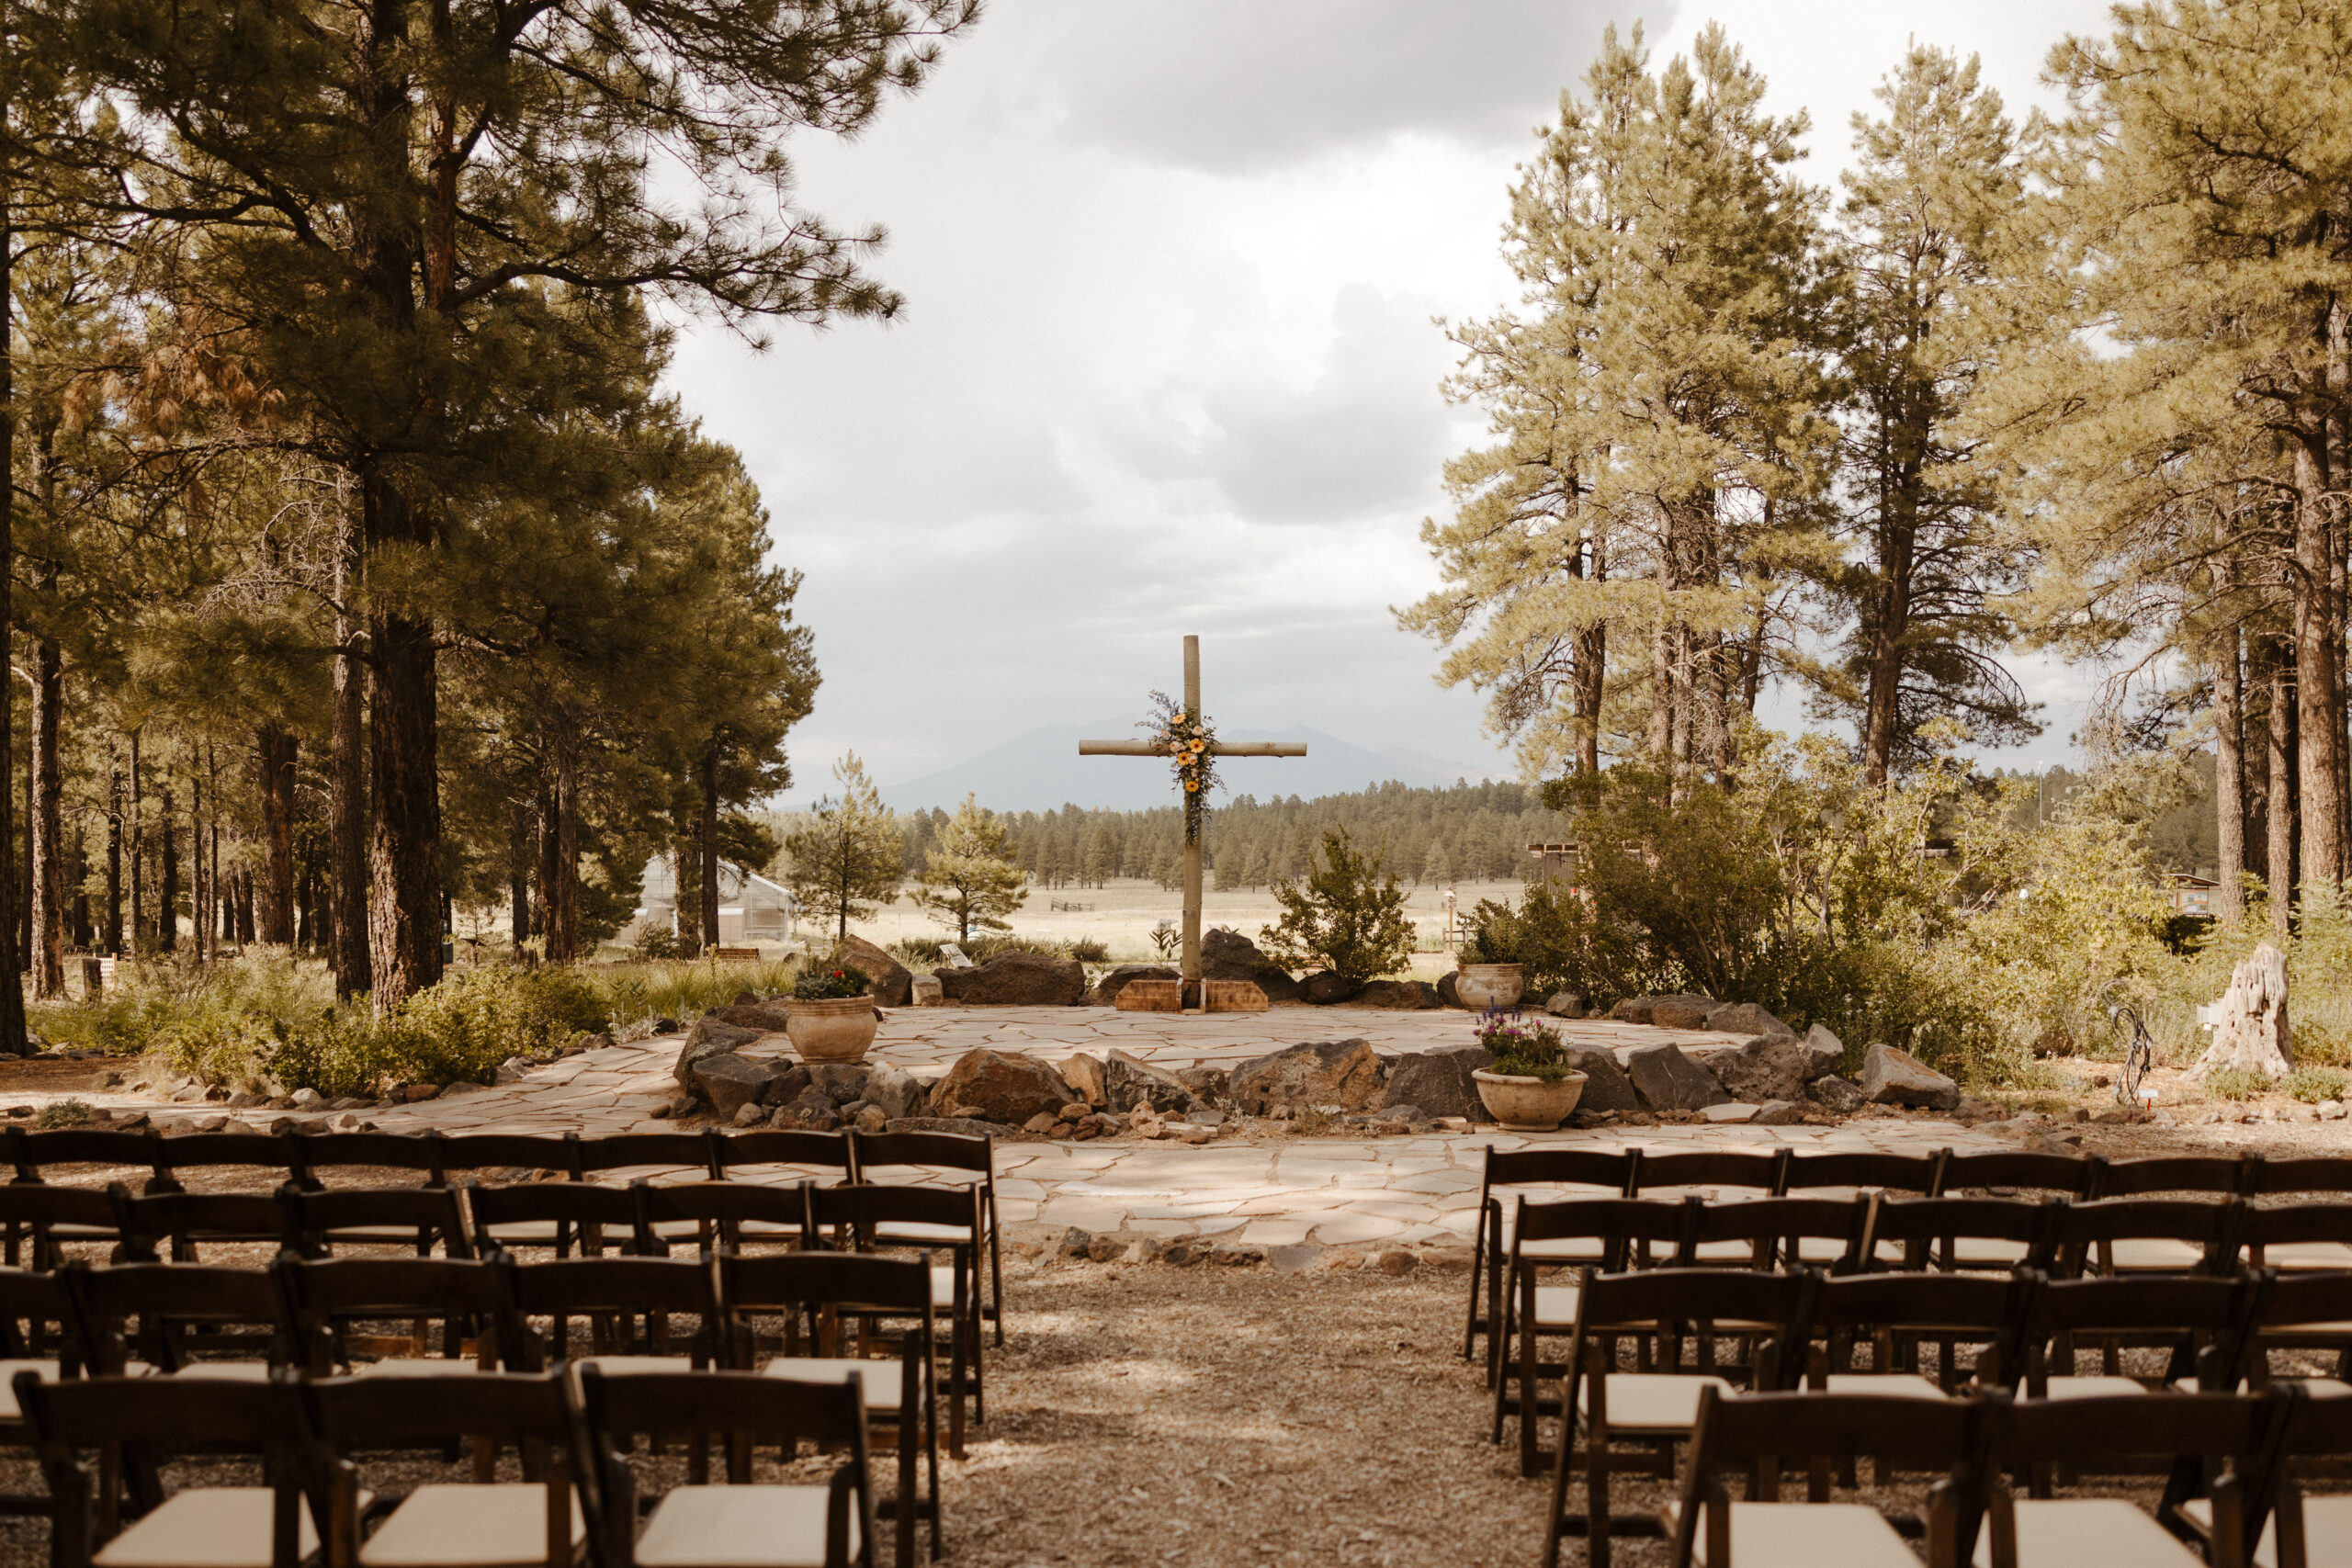 ceremony aisle and altar at one of Arizona's forest wedding venues 